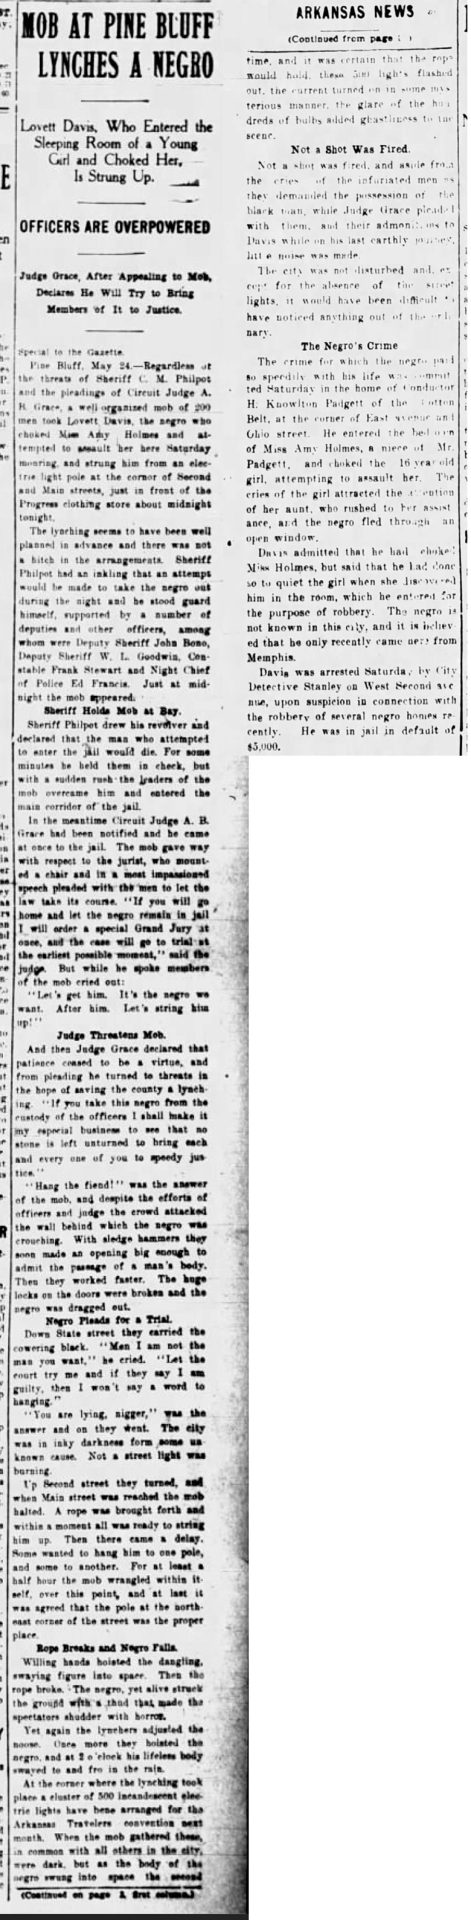 "Mob at Pine Bluff lynches a Negro" newspaper clipping